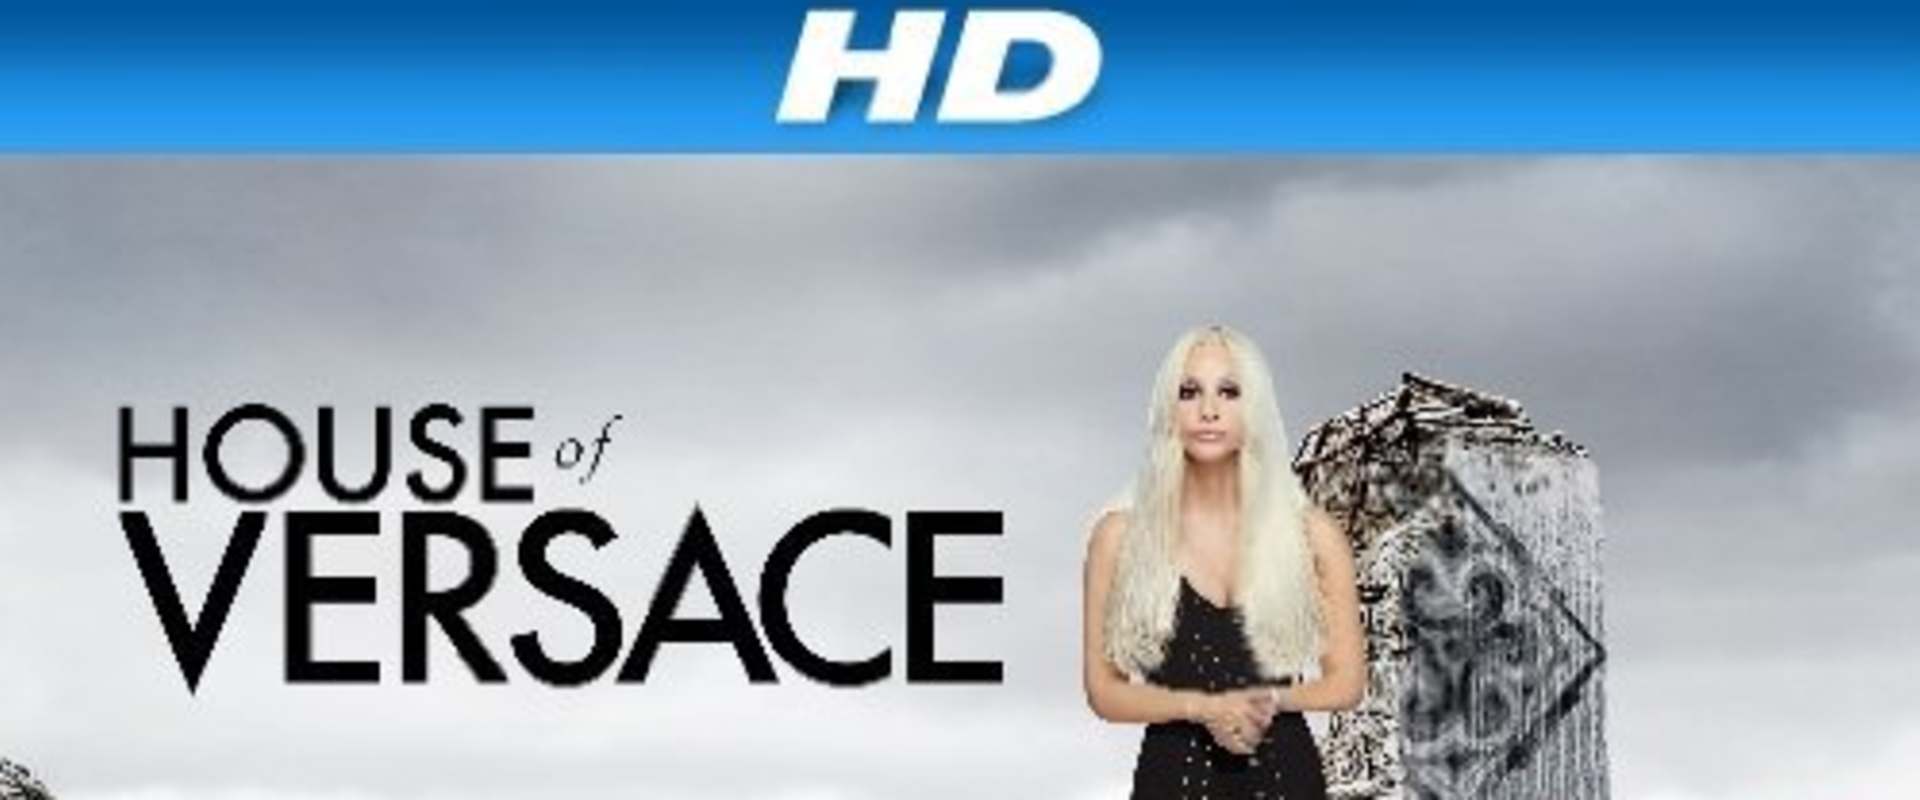 House of Versace background 2